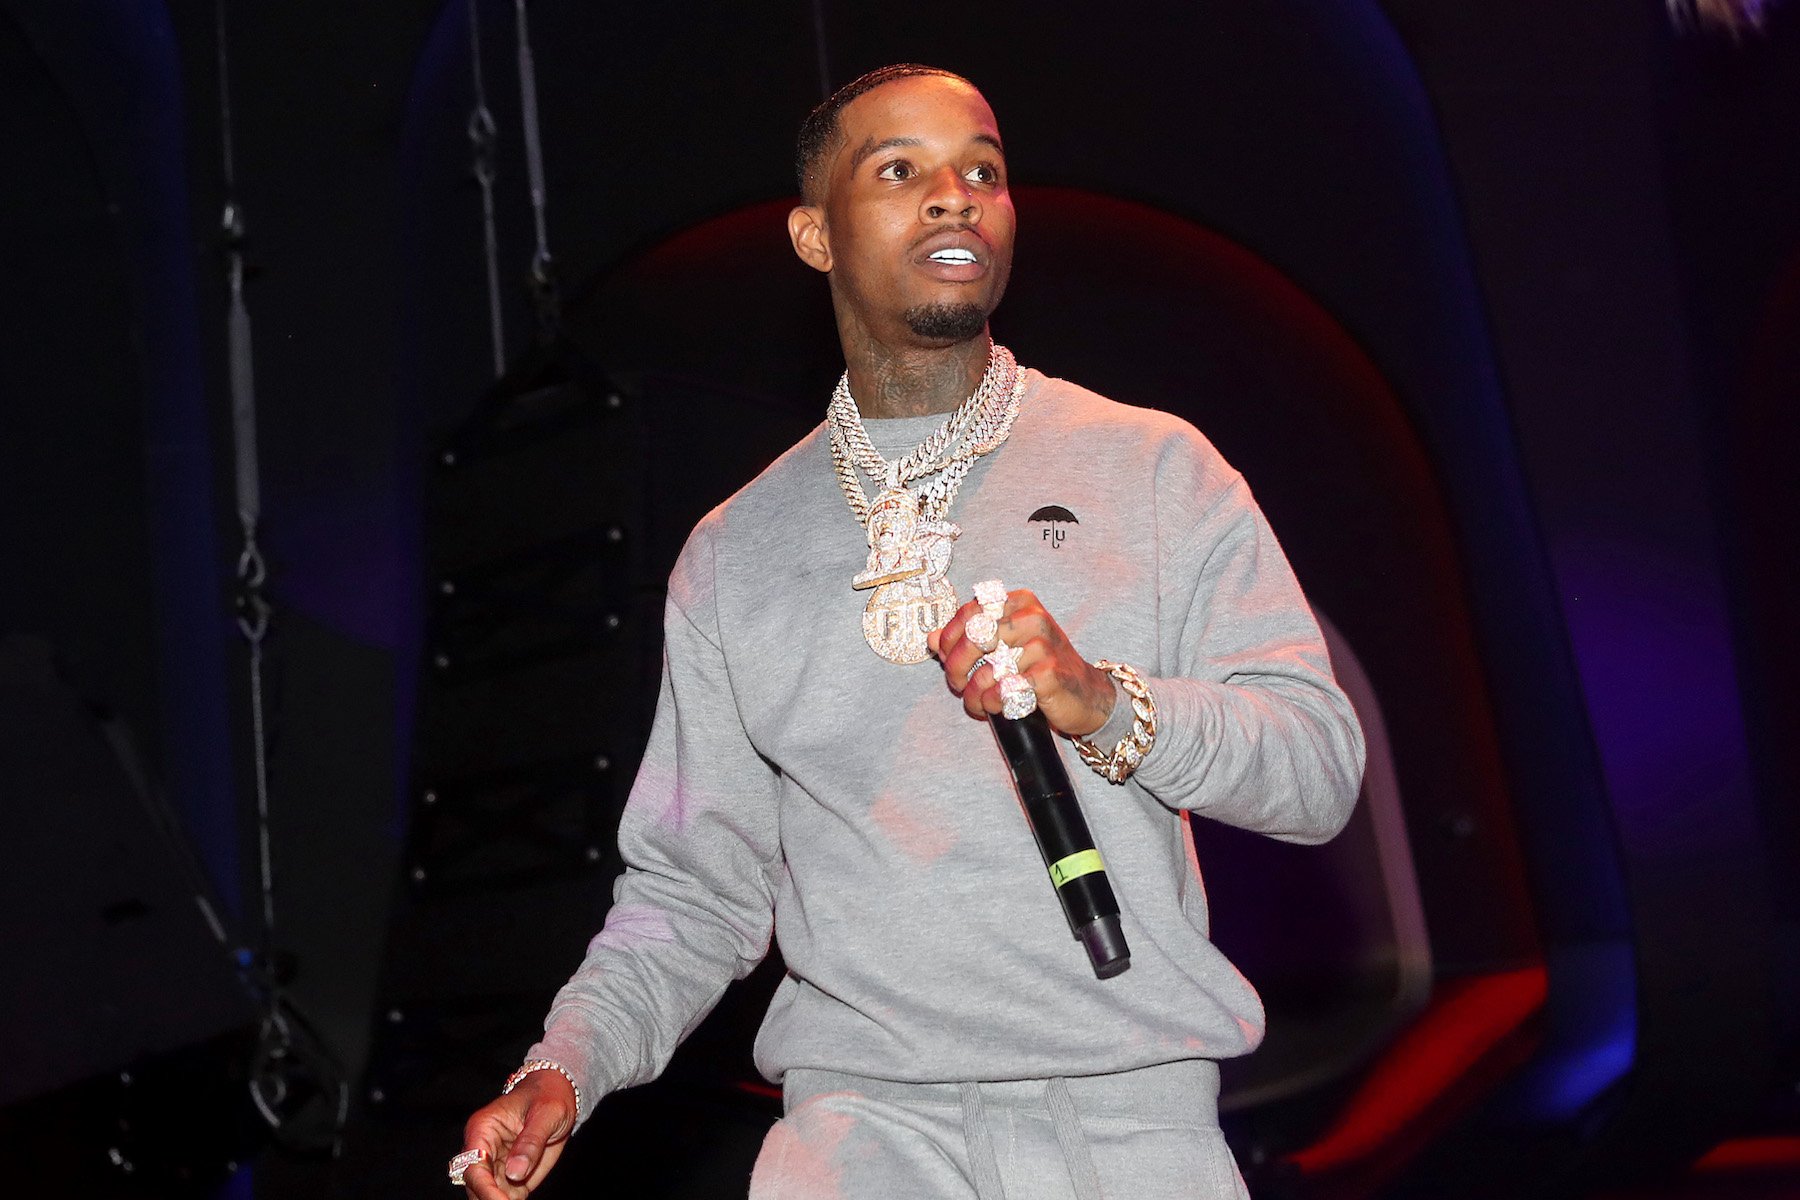 Tory Lanez, alleged to have shot Megan Thee Stallion, performing in a grey sweatsuit